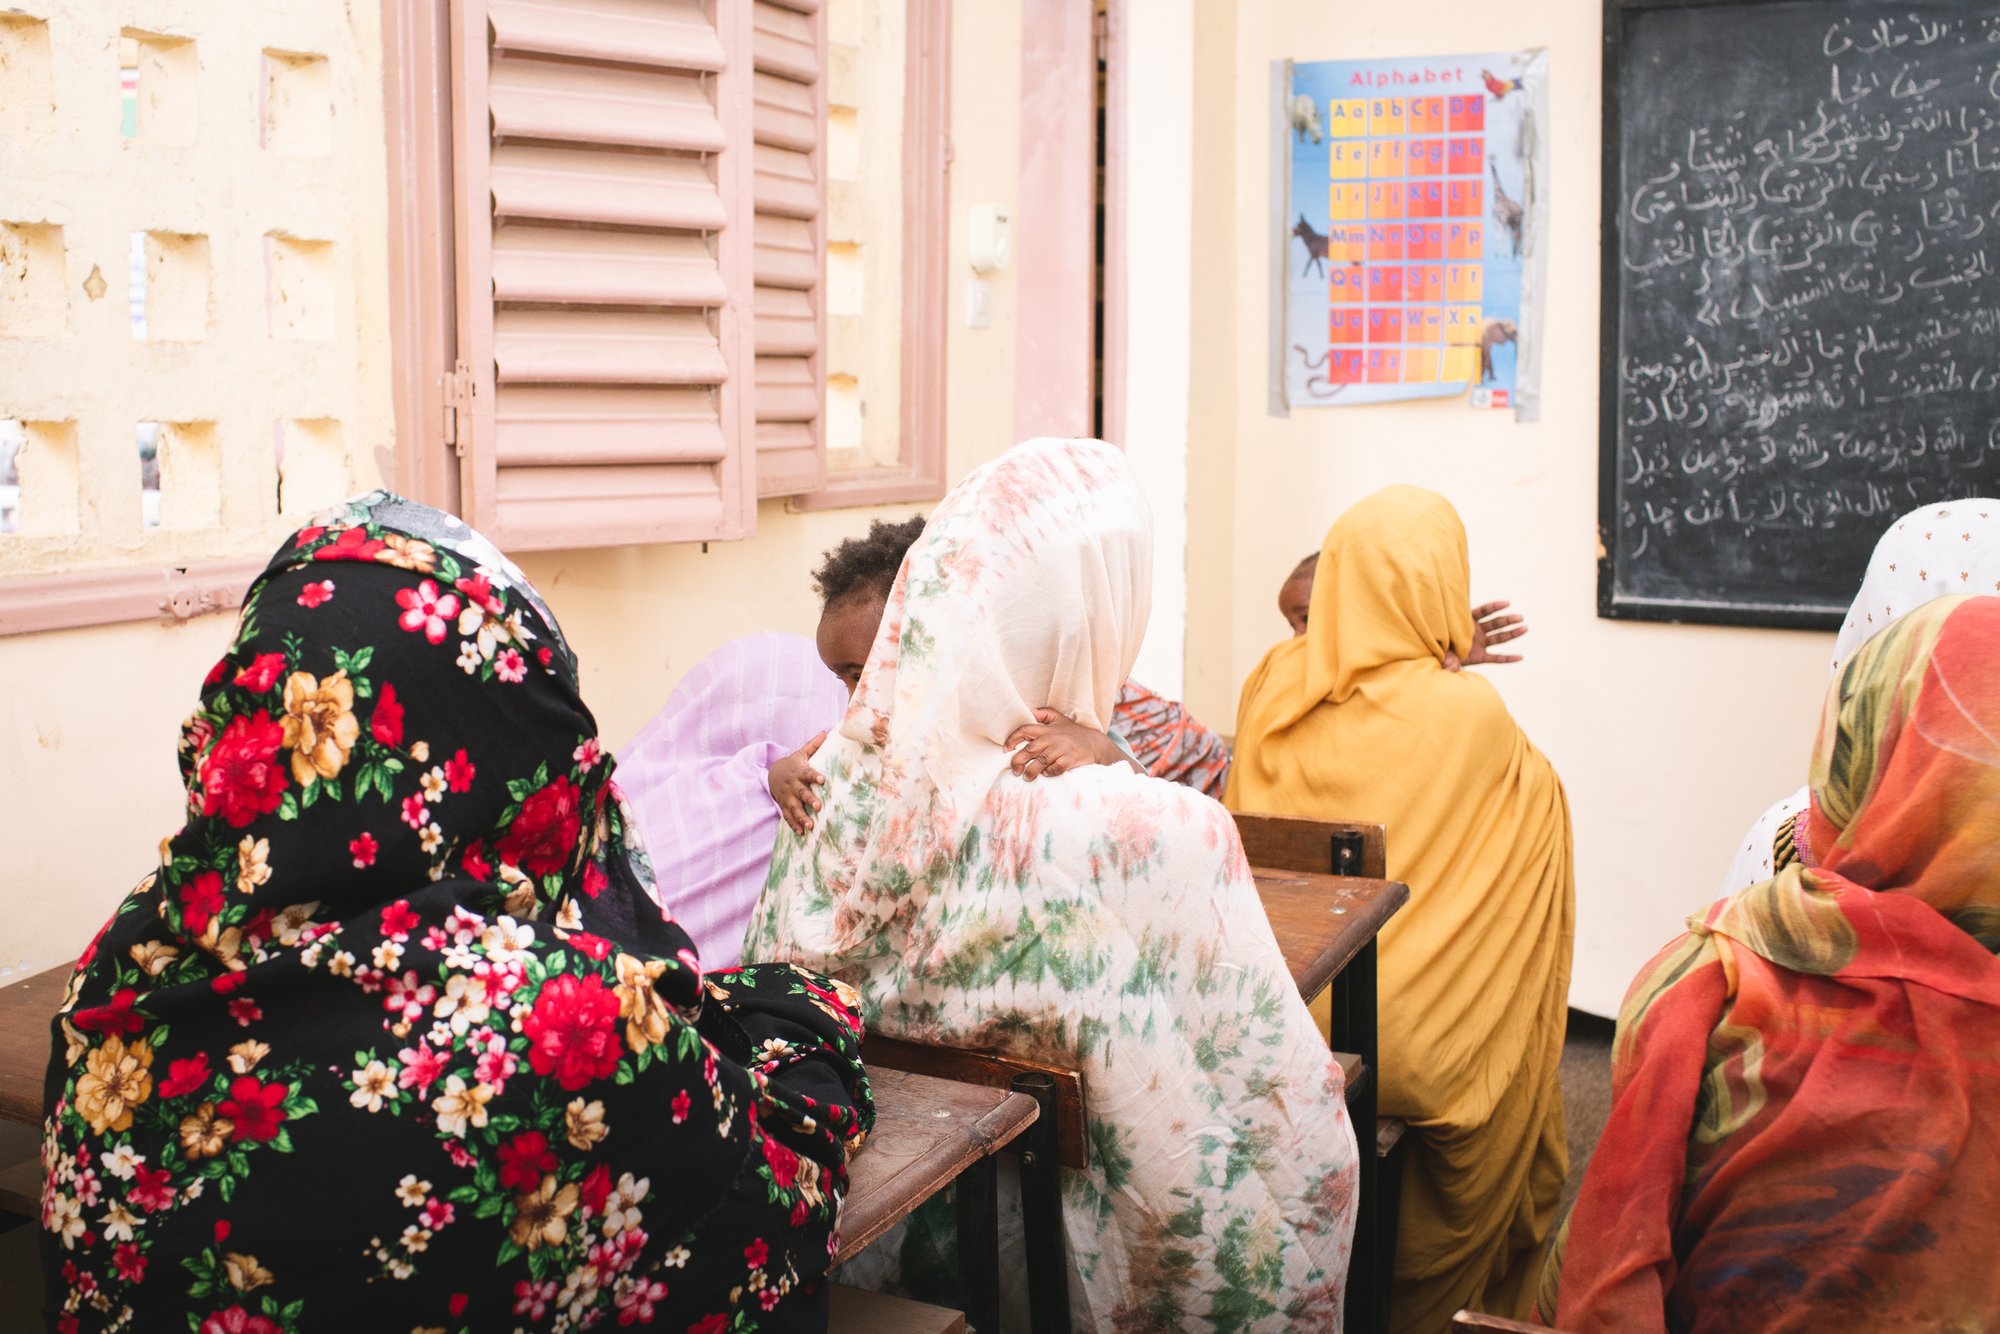 Adolescent girls learn to read and write in Arabic at El Wava, a center in Nouakchott, Mauritania, some holding their children conceived in rape.